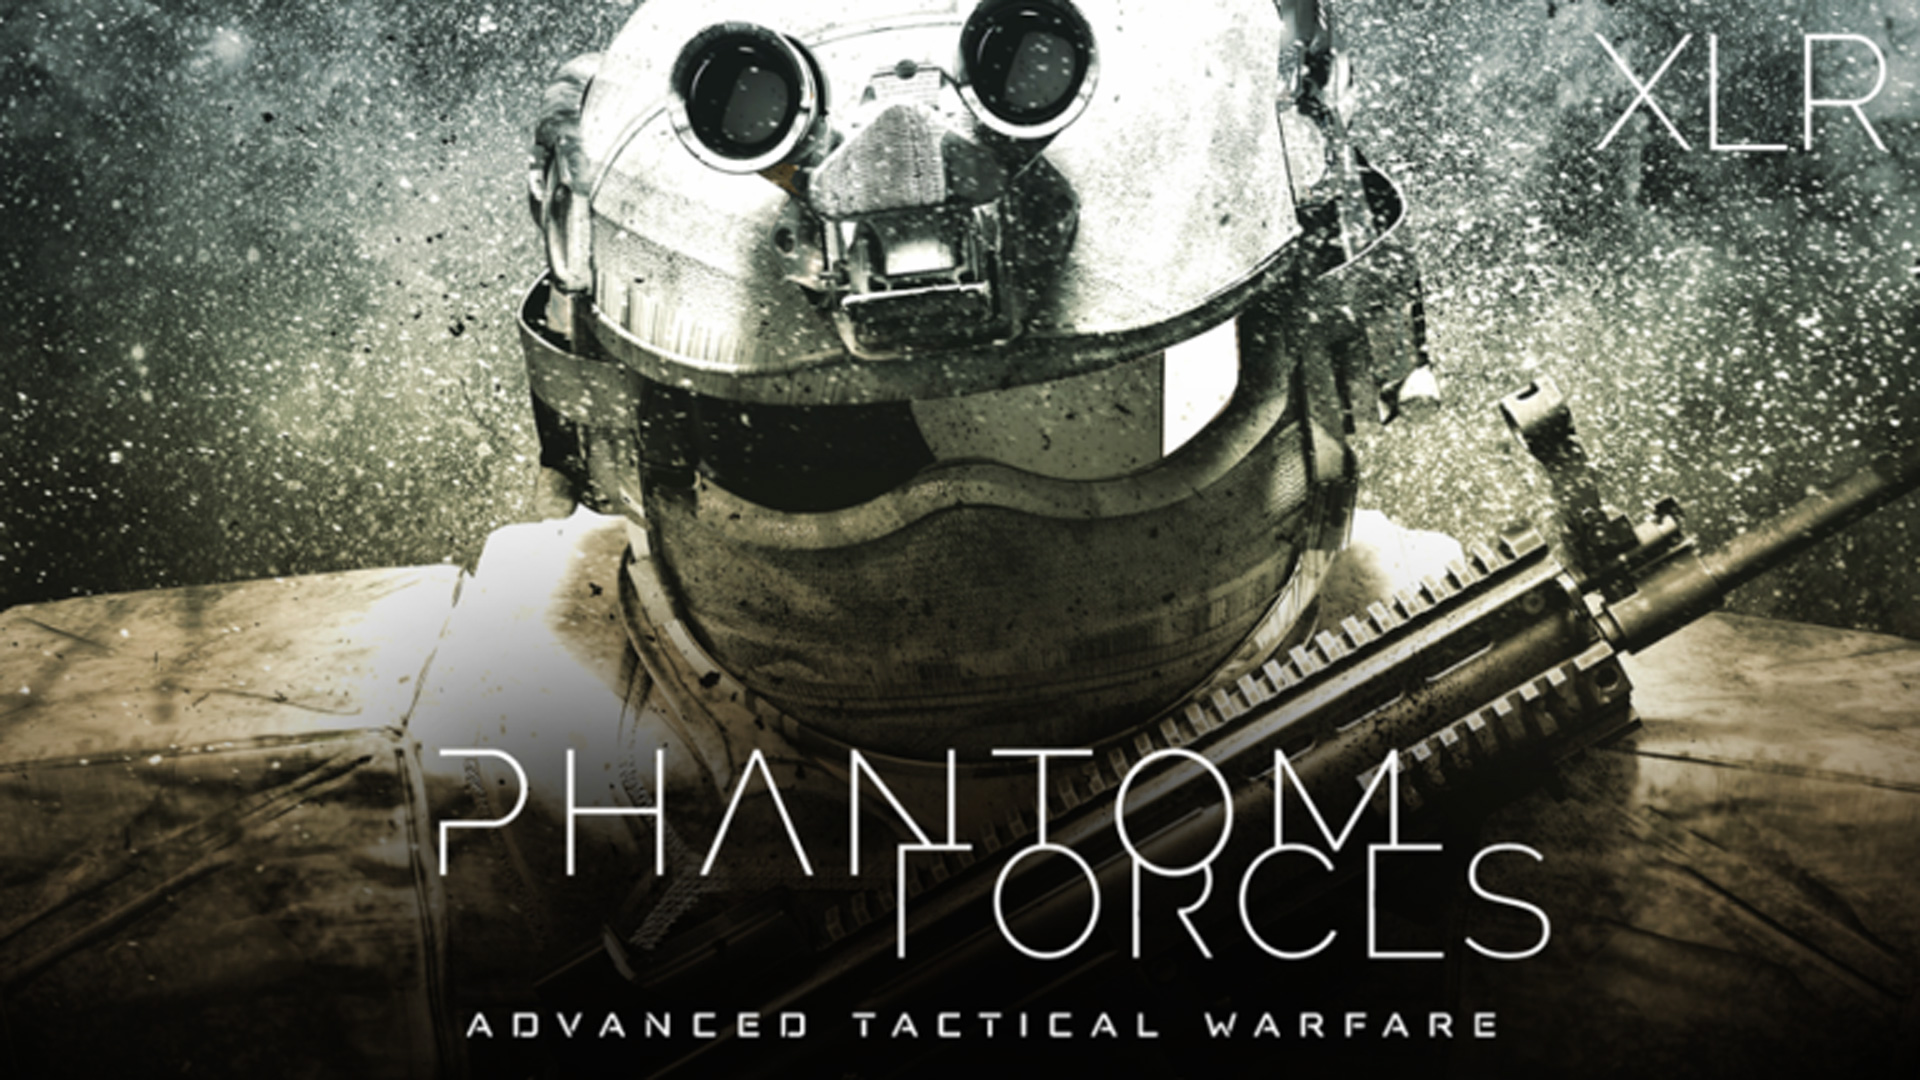 How to vote kick in Phantom Forces?